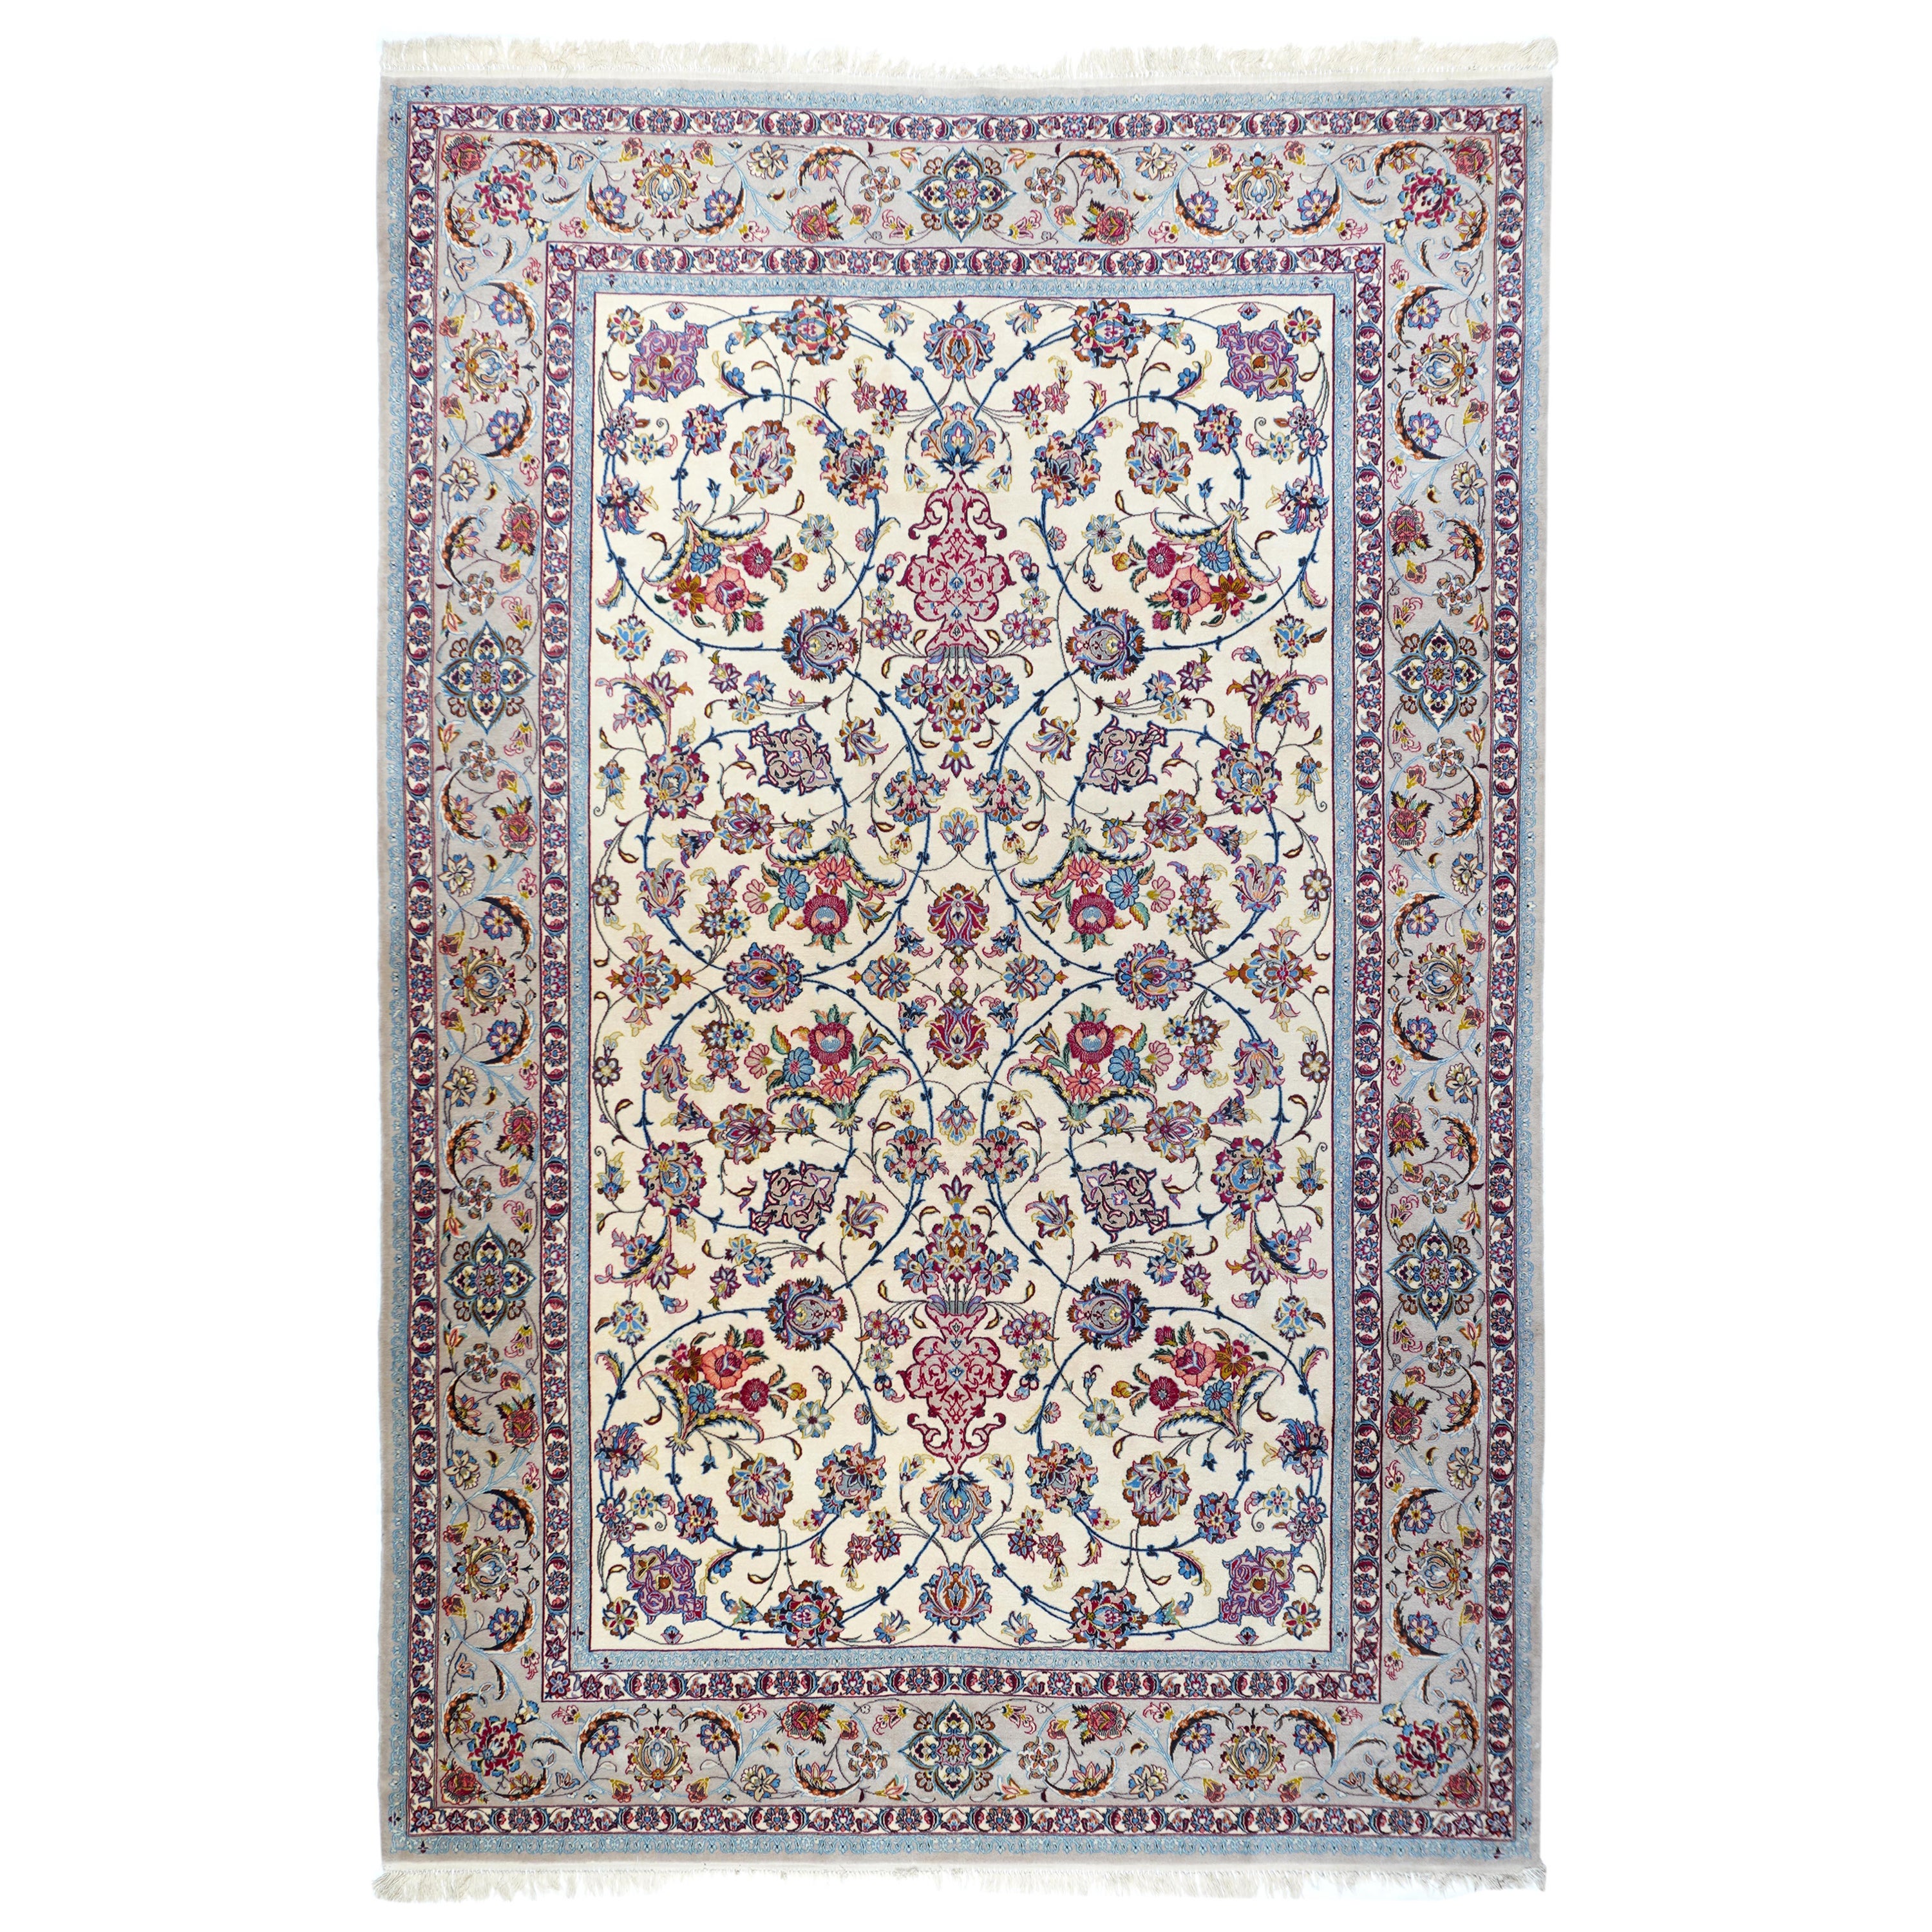 Extremely Fine Persian Isfahan Wool & Silk Rug 7'0'' x 10'0''